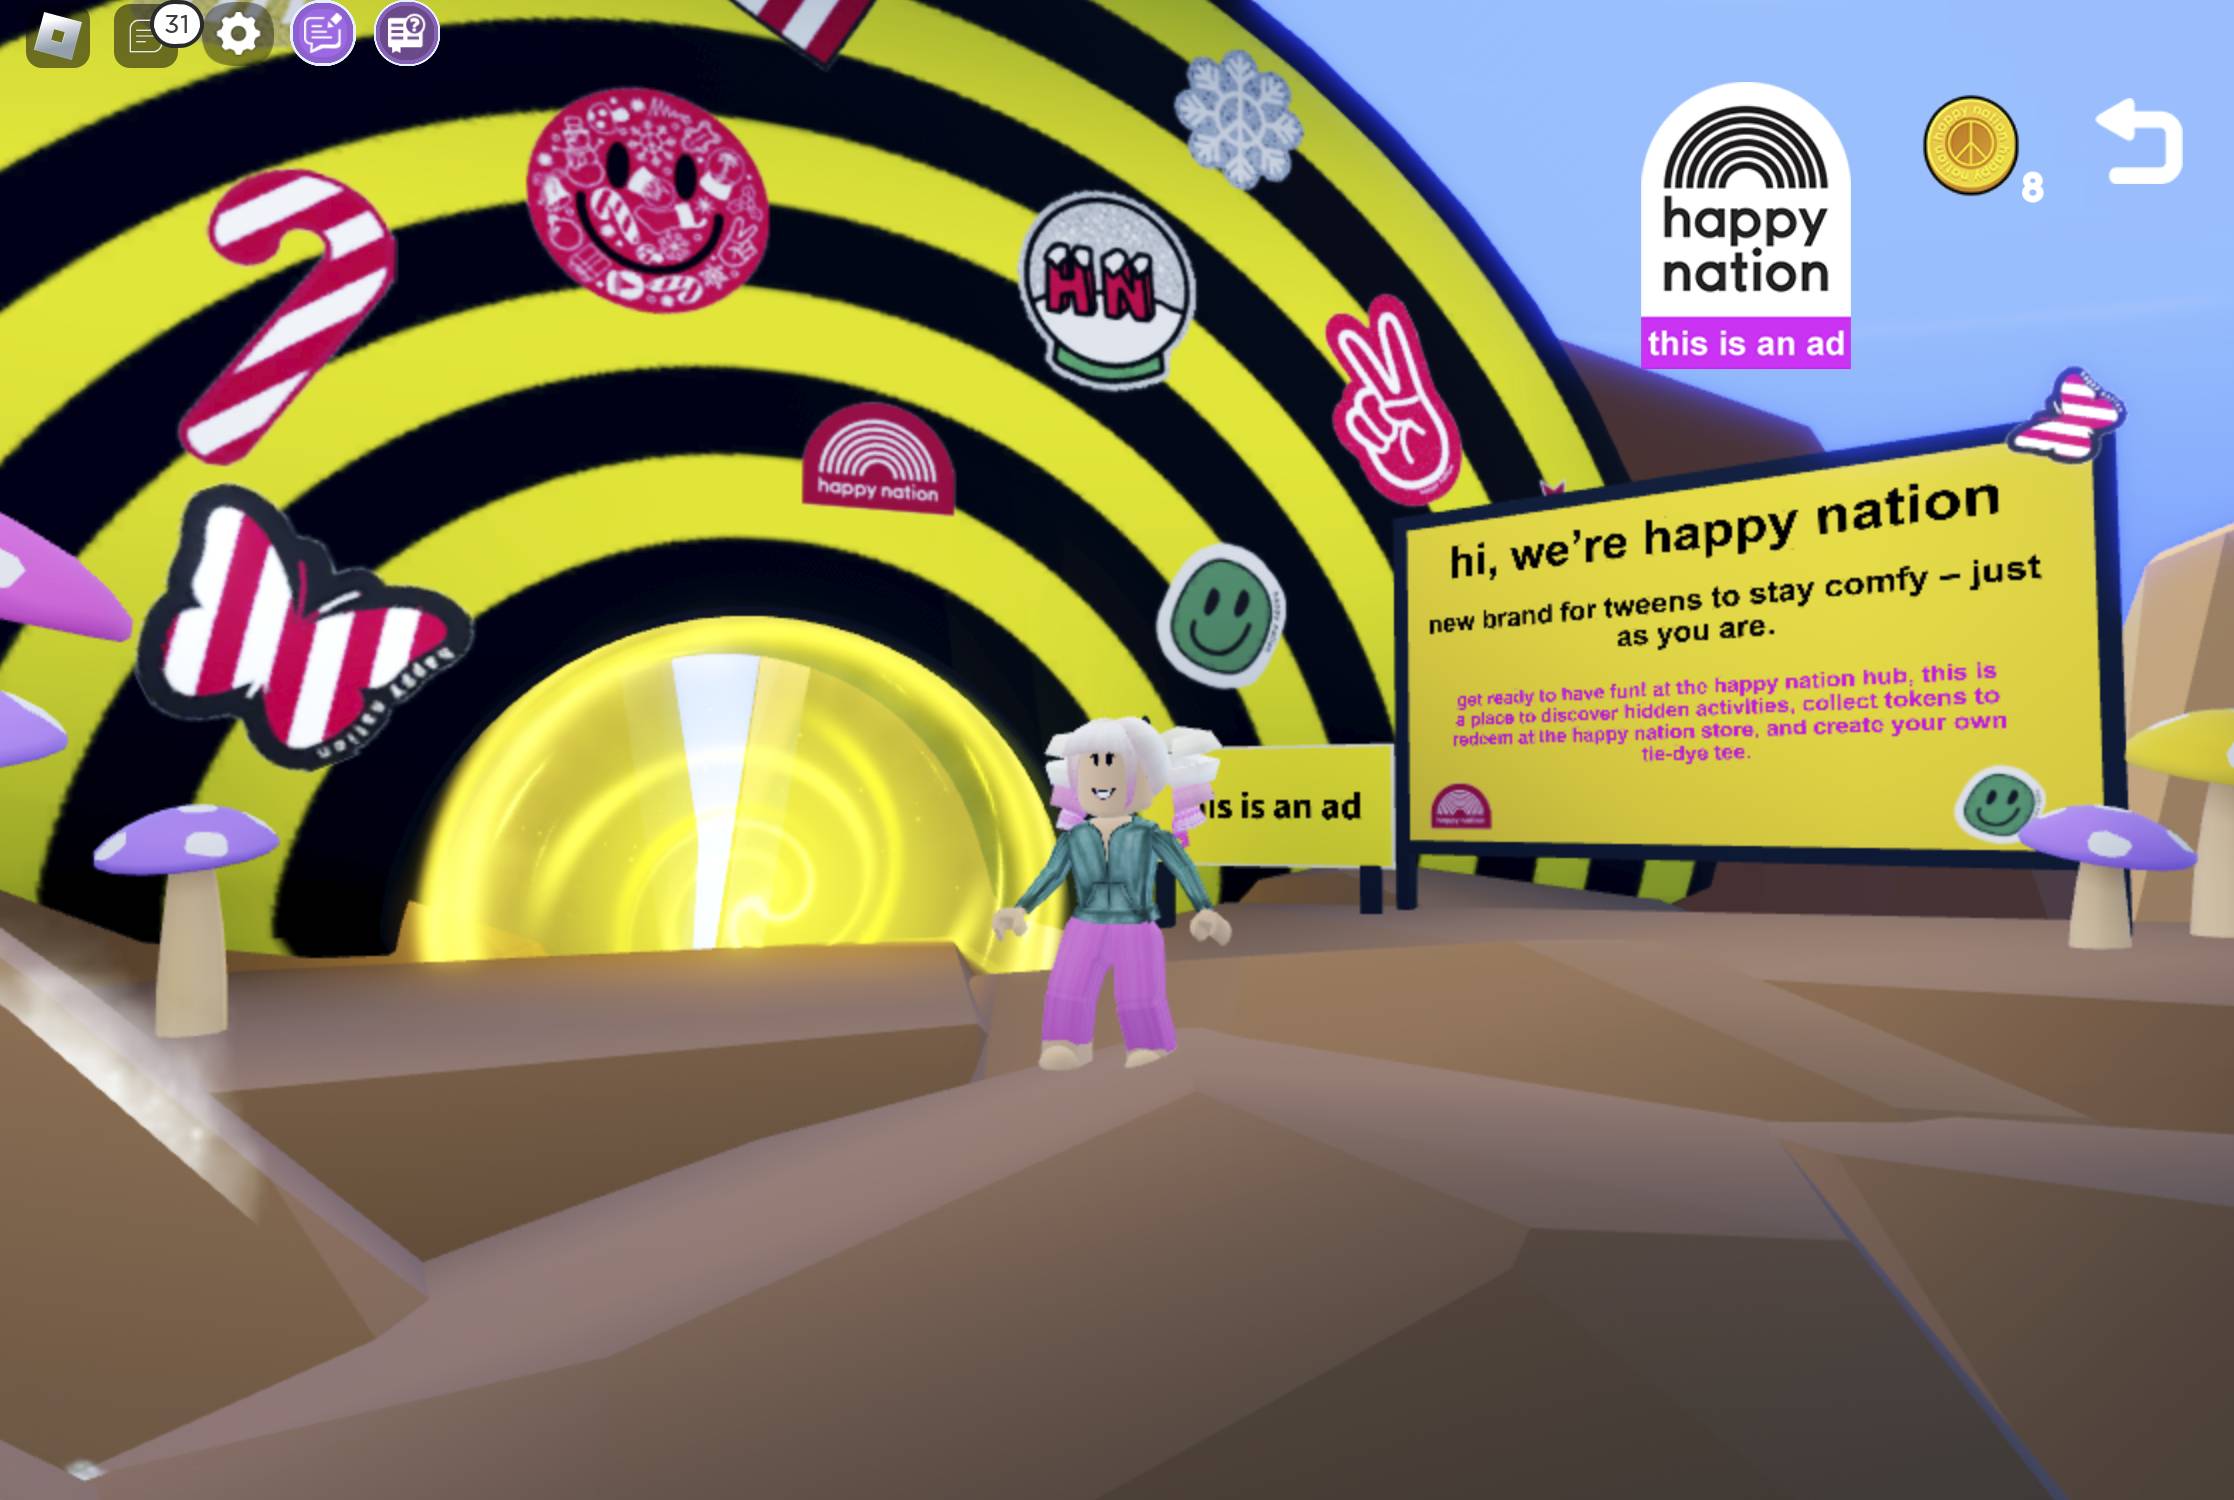 VS&Co's Happy Nation playable area in Roblox